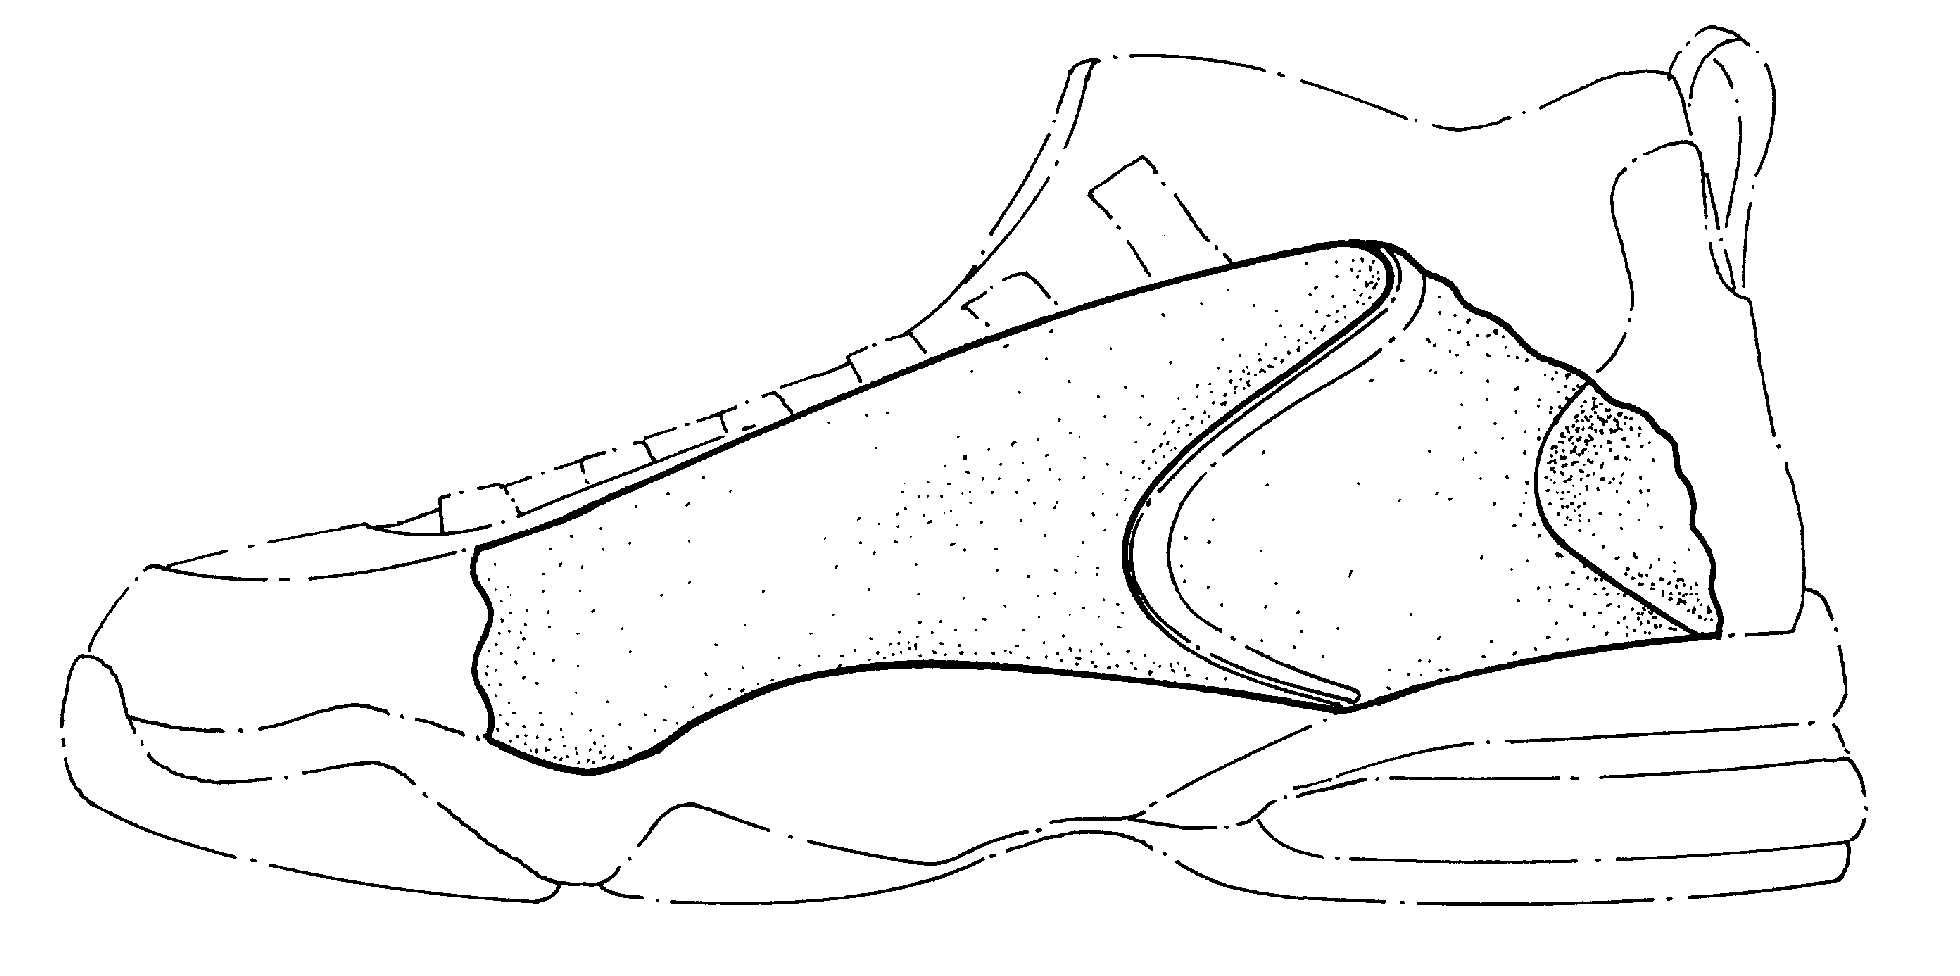 A typical example of  a shoe vamp or side panel.
